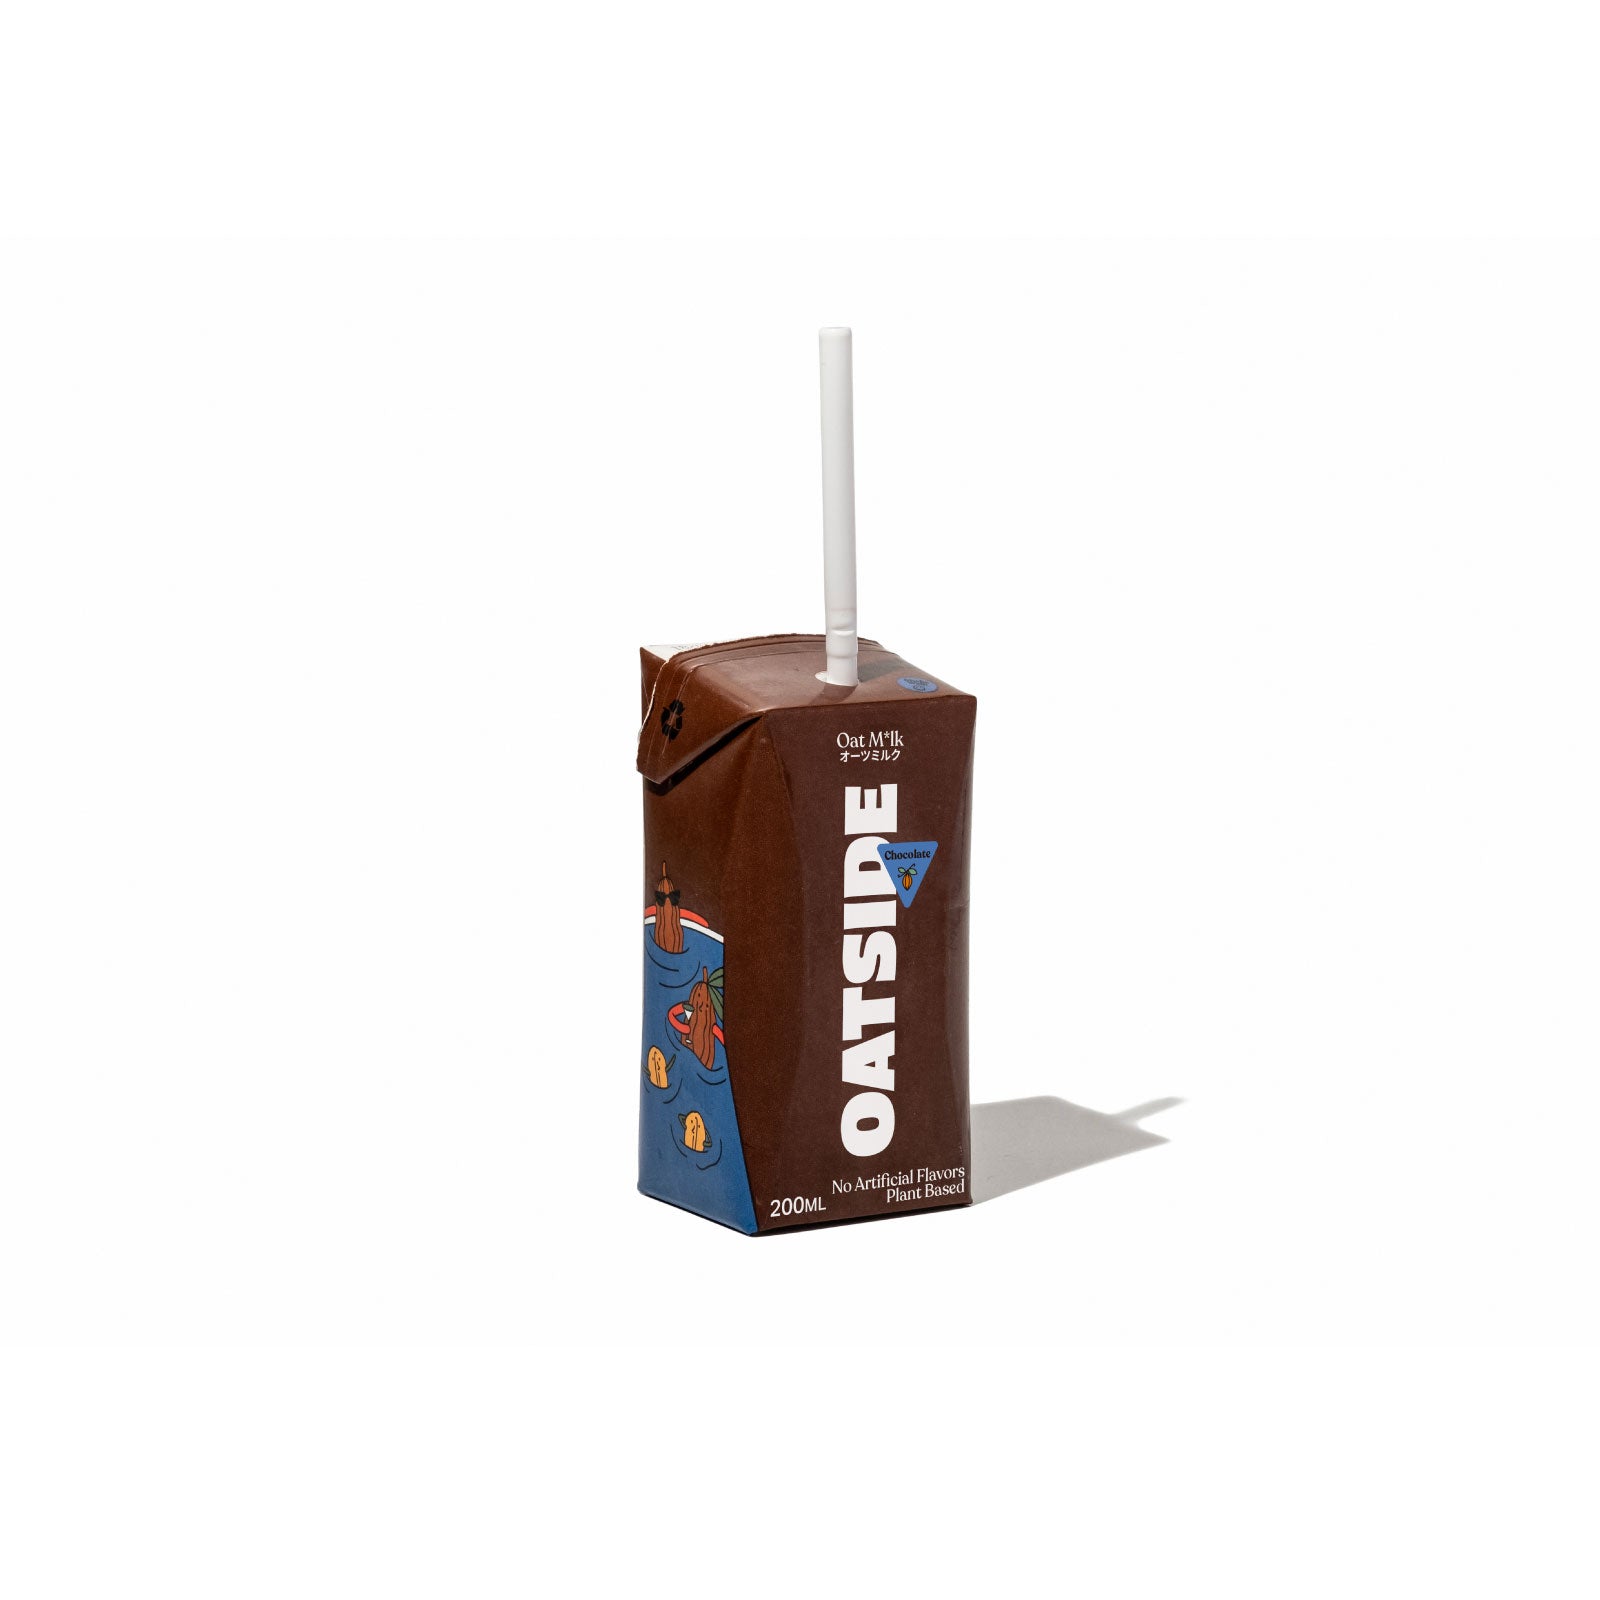 Chocolate Pocket Packs with Straw (24 x 200ml) Subscription